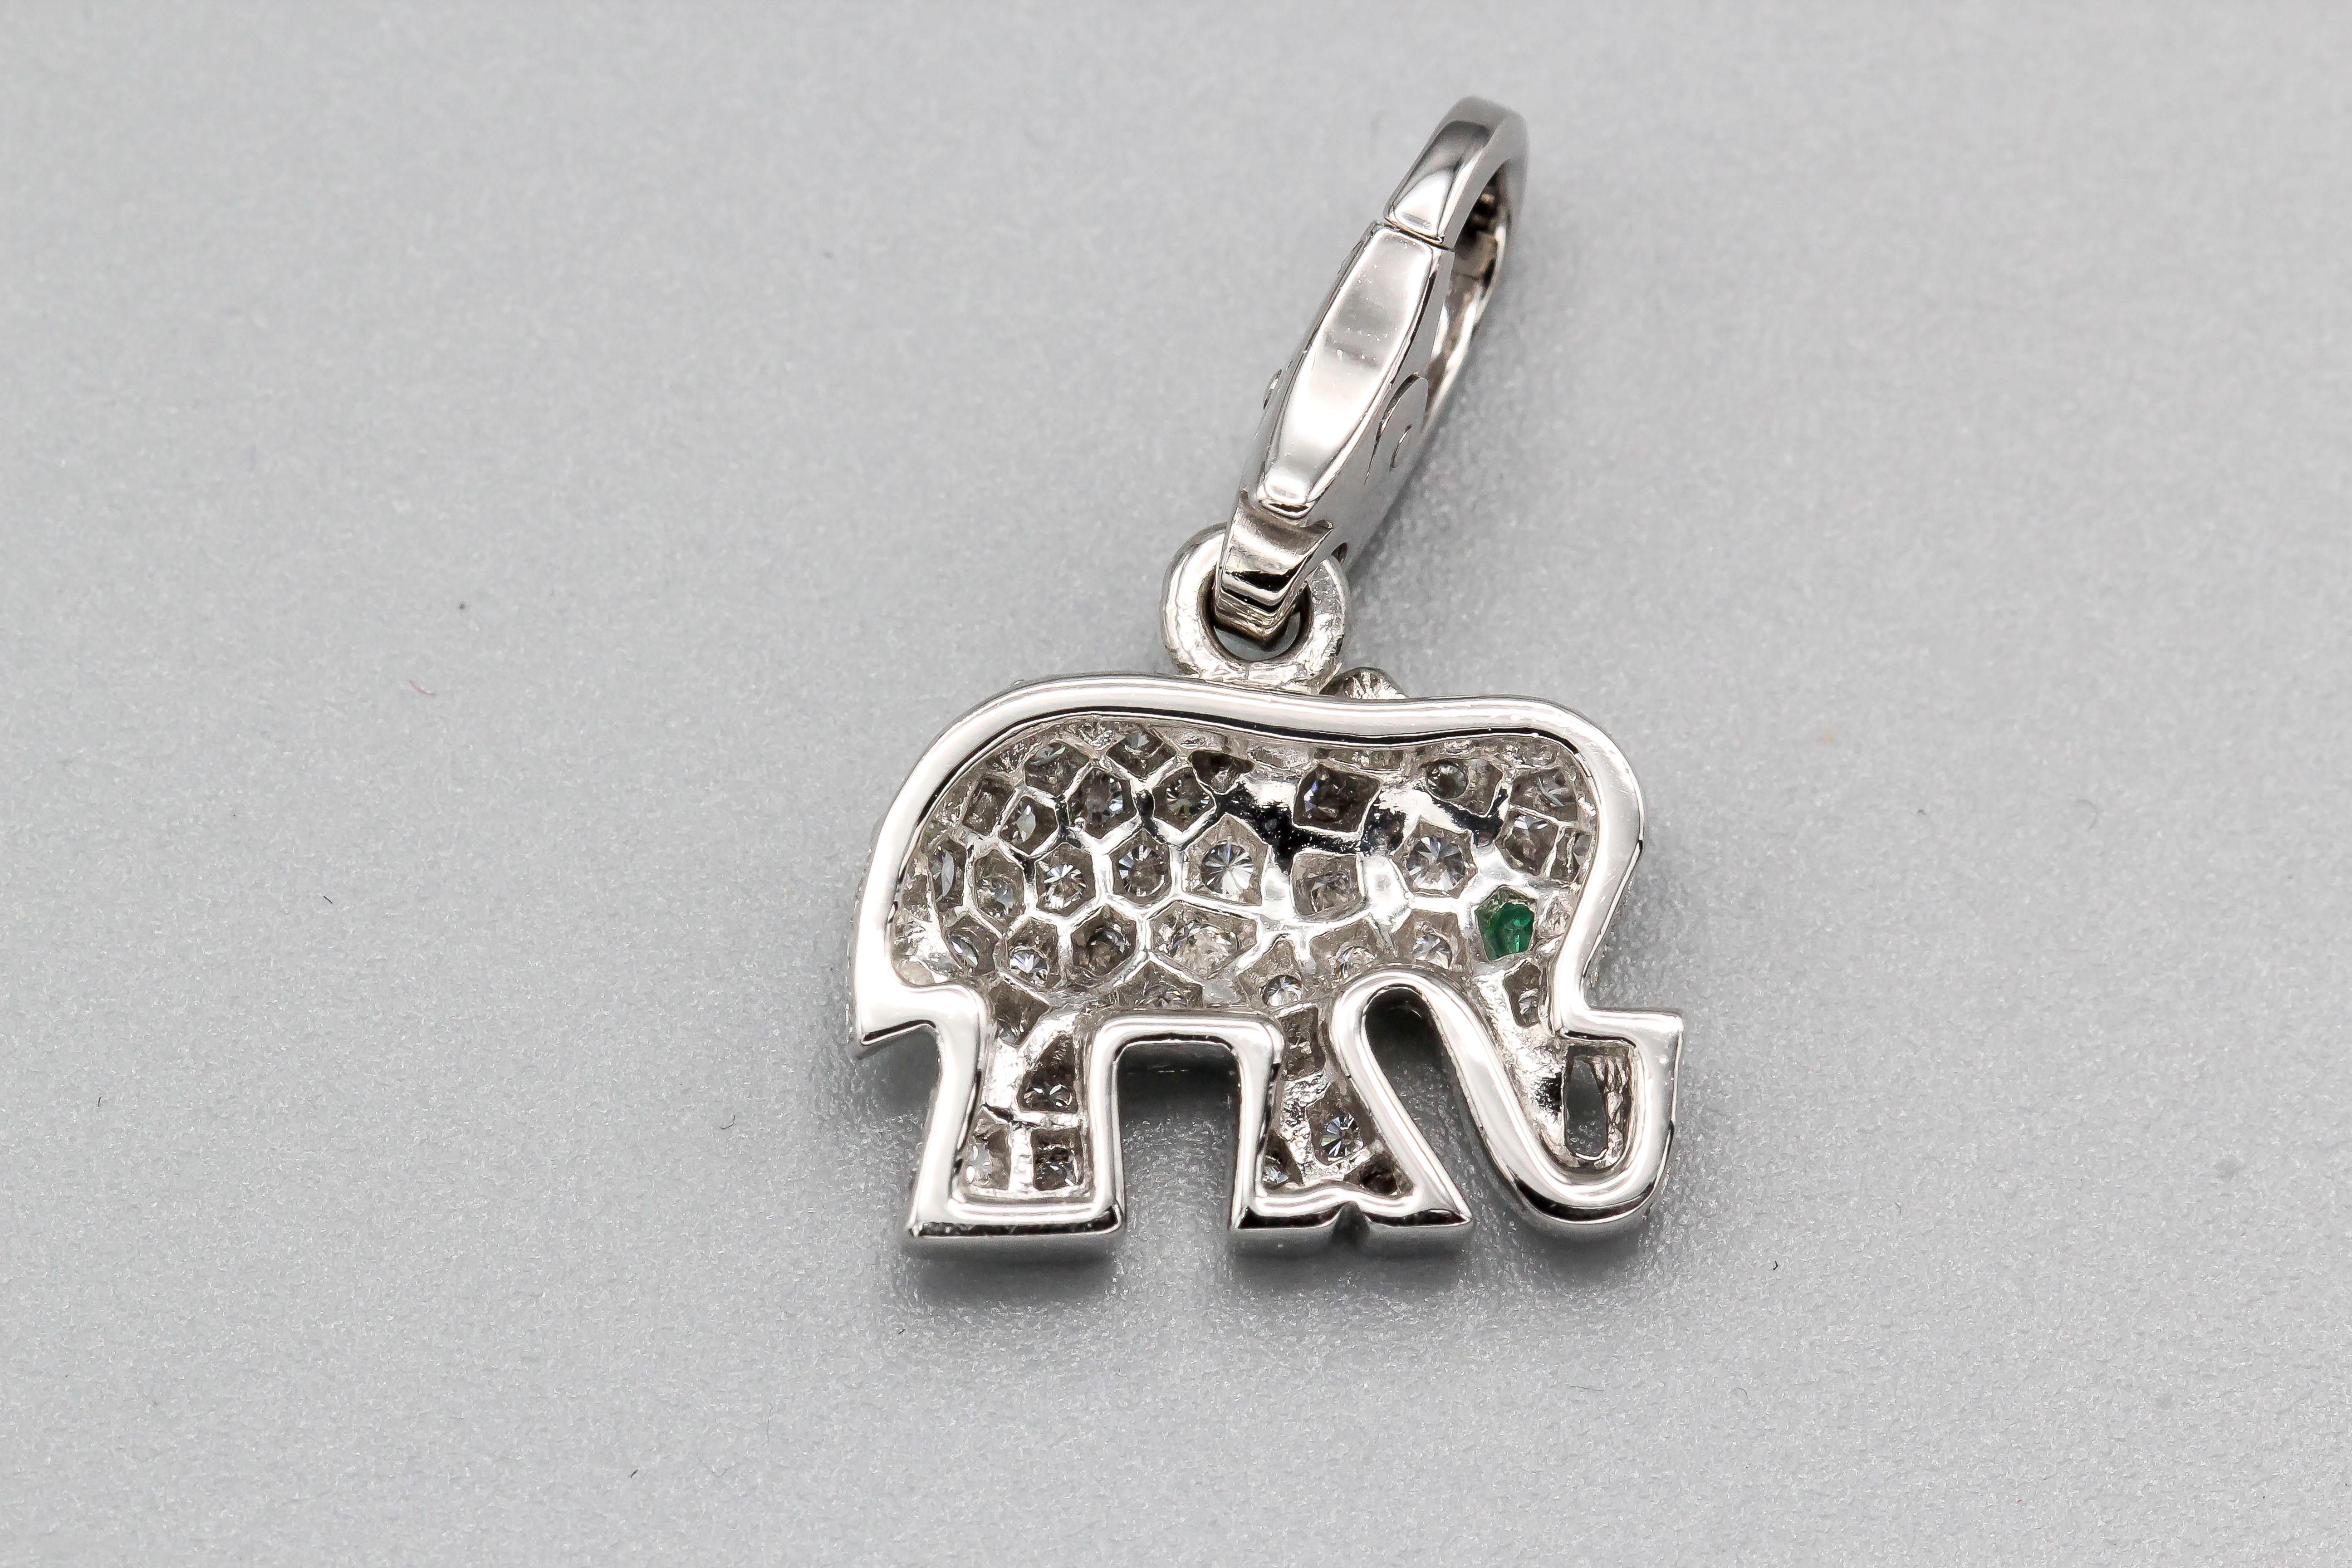 Fine diamond, emerald and 18K white gold elephant charm by Cartier.  Well made and easy to add to any bracelet or pendant.

Hallmarks: Cartier, 750 reference numbers, maker's mark, French 18k gold assay marks.